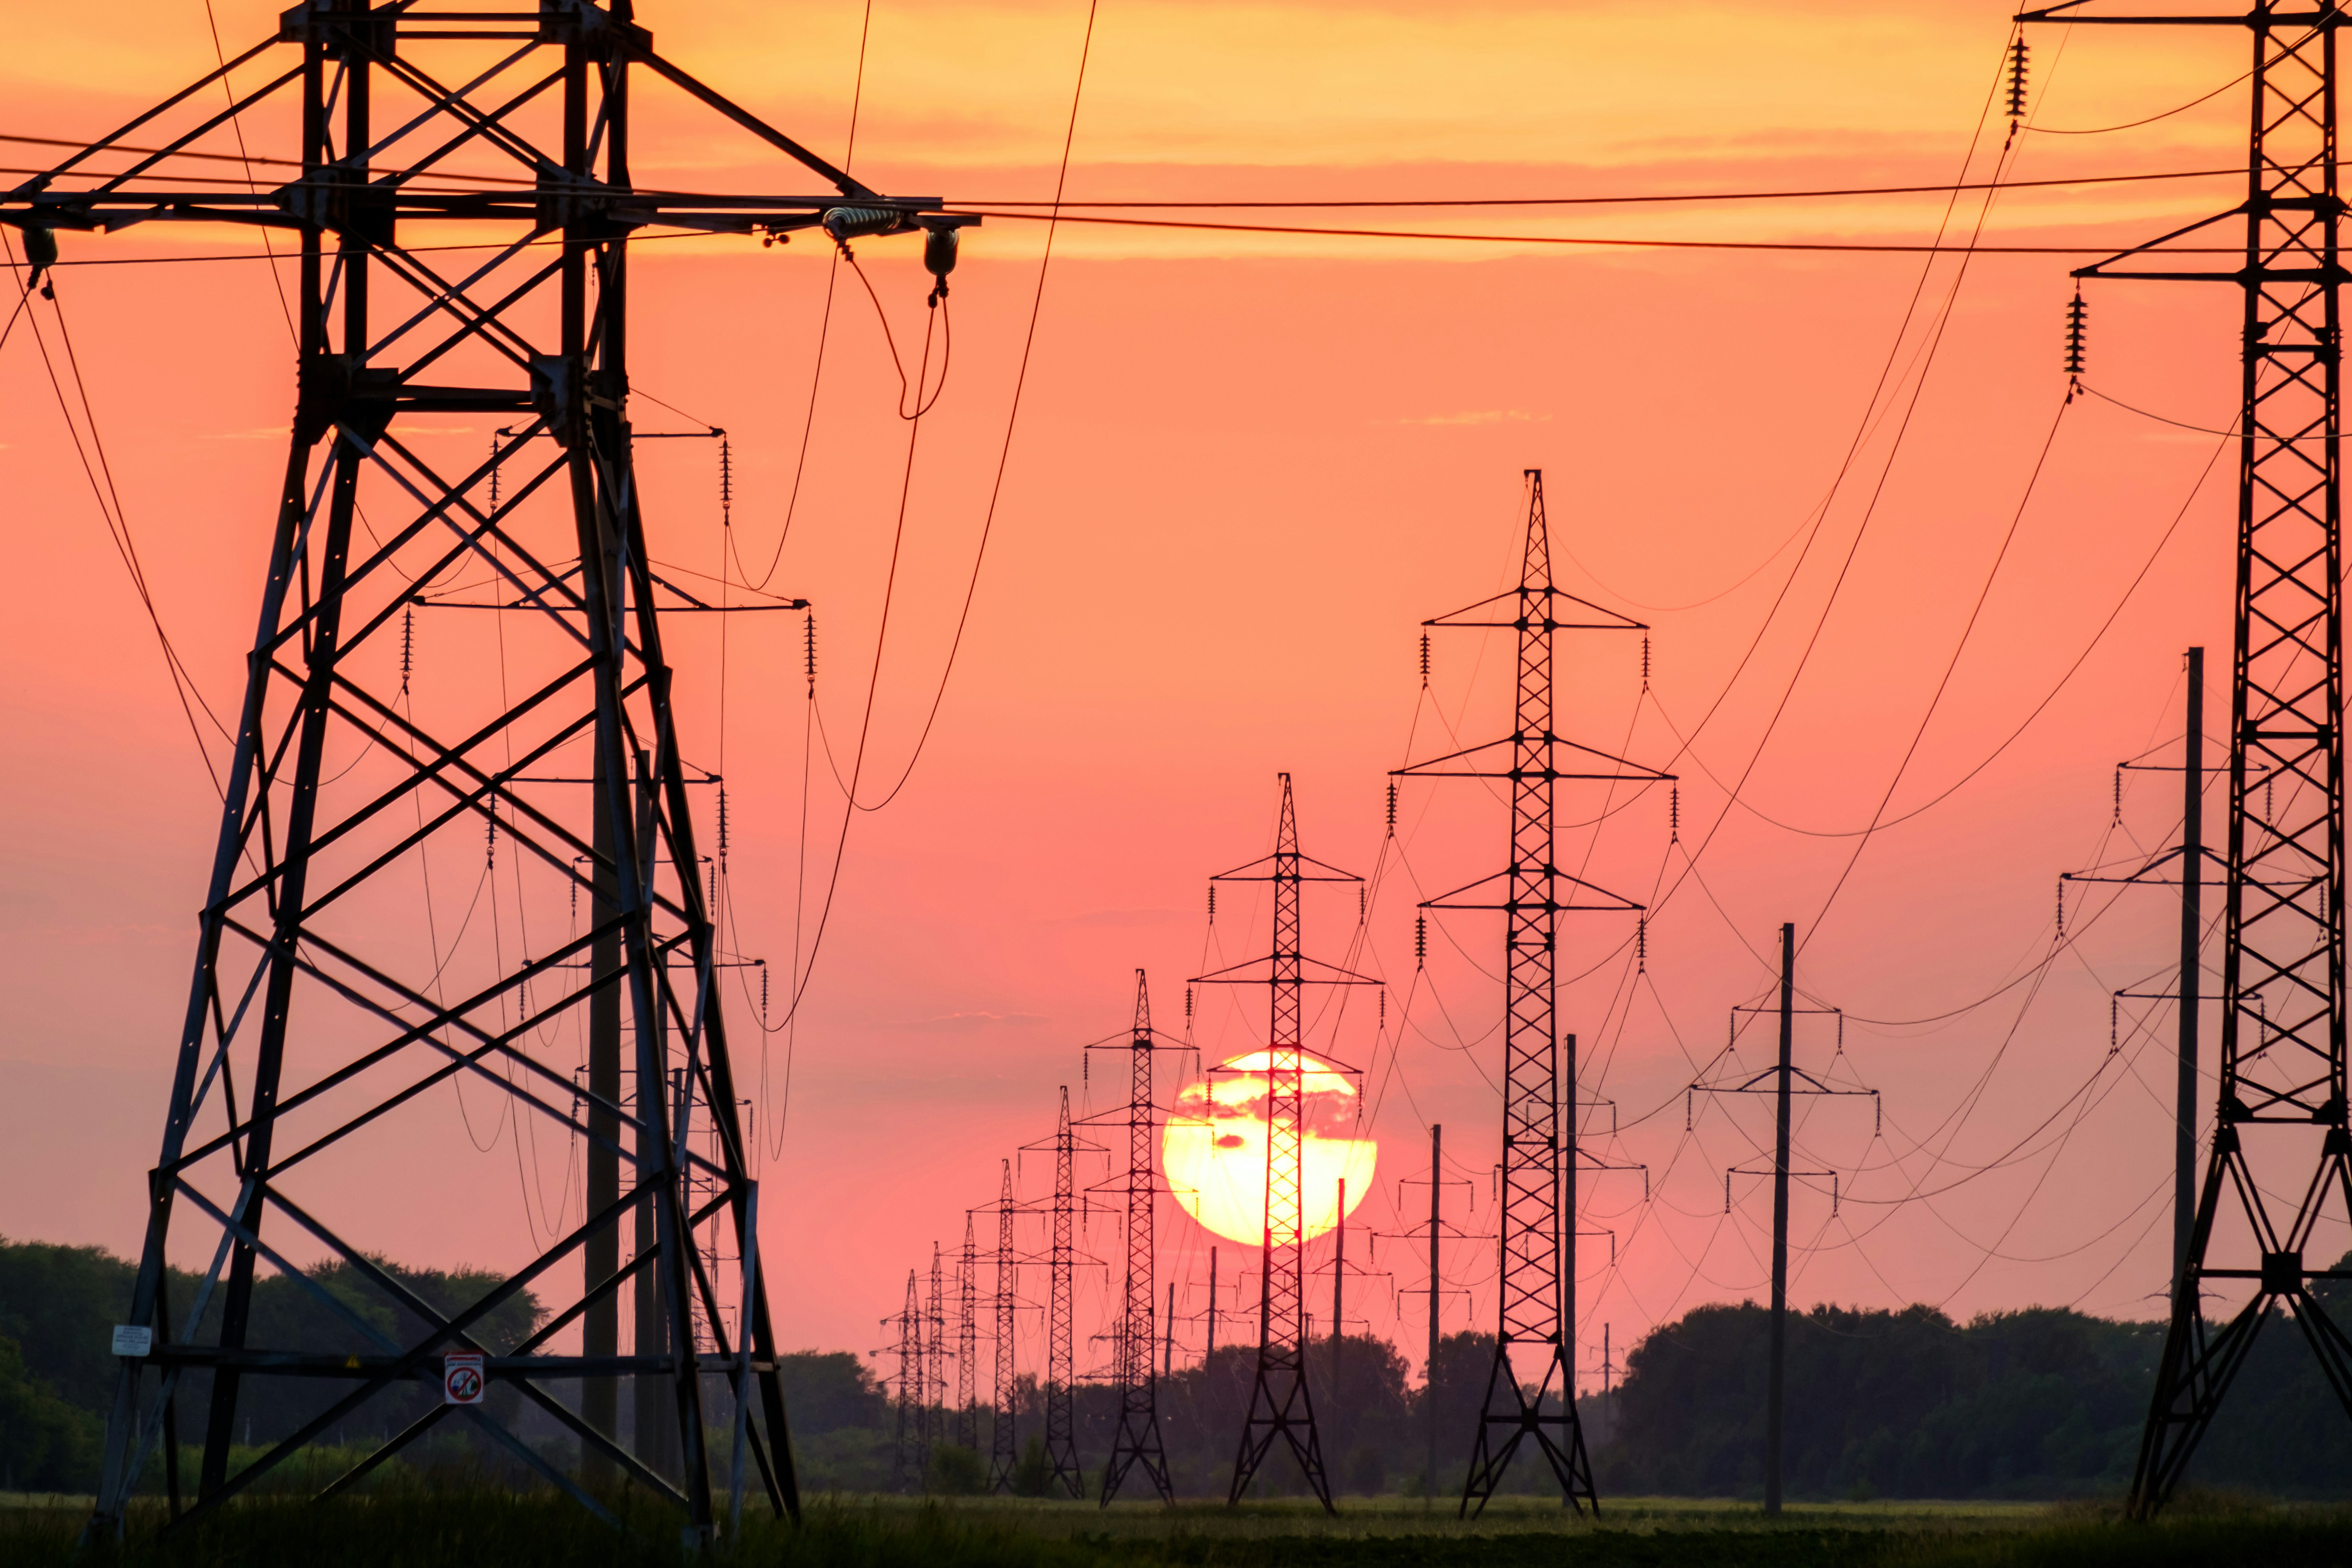 Power Grid at Sunset (C) Andrey Metelev